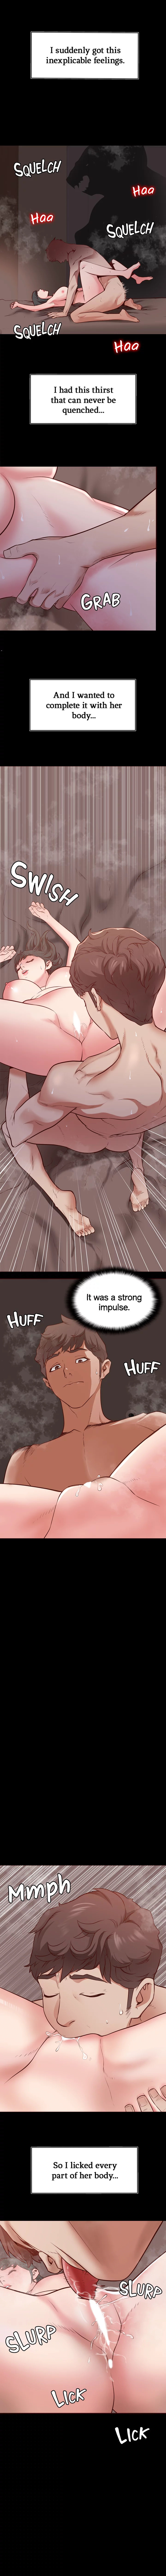 Wrath of the Underdog Chapter 5 - Page 6